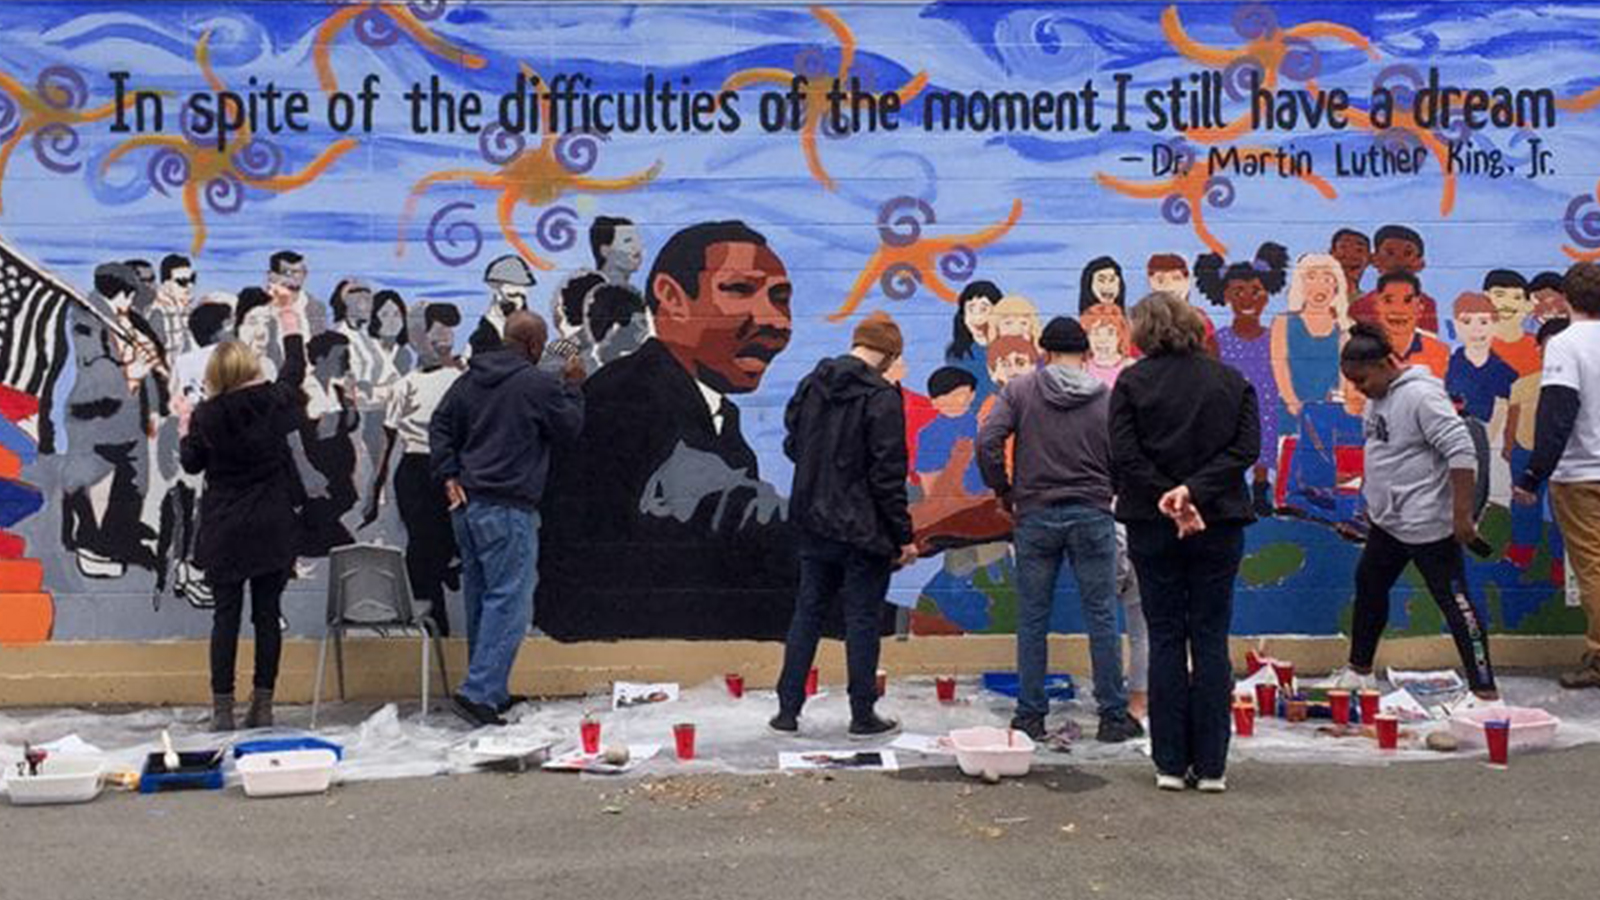 Community members painting a mural of Dr. Martin Luther King, Jr.